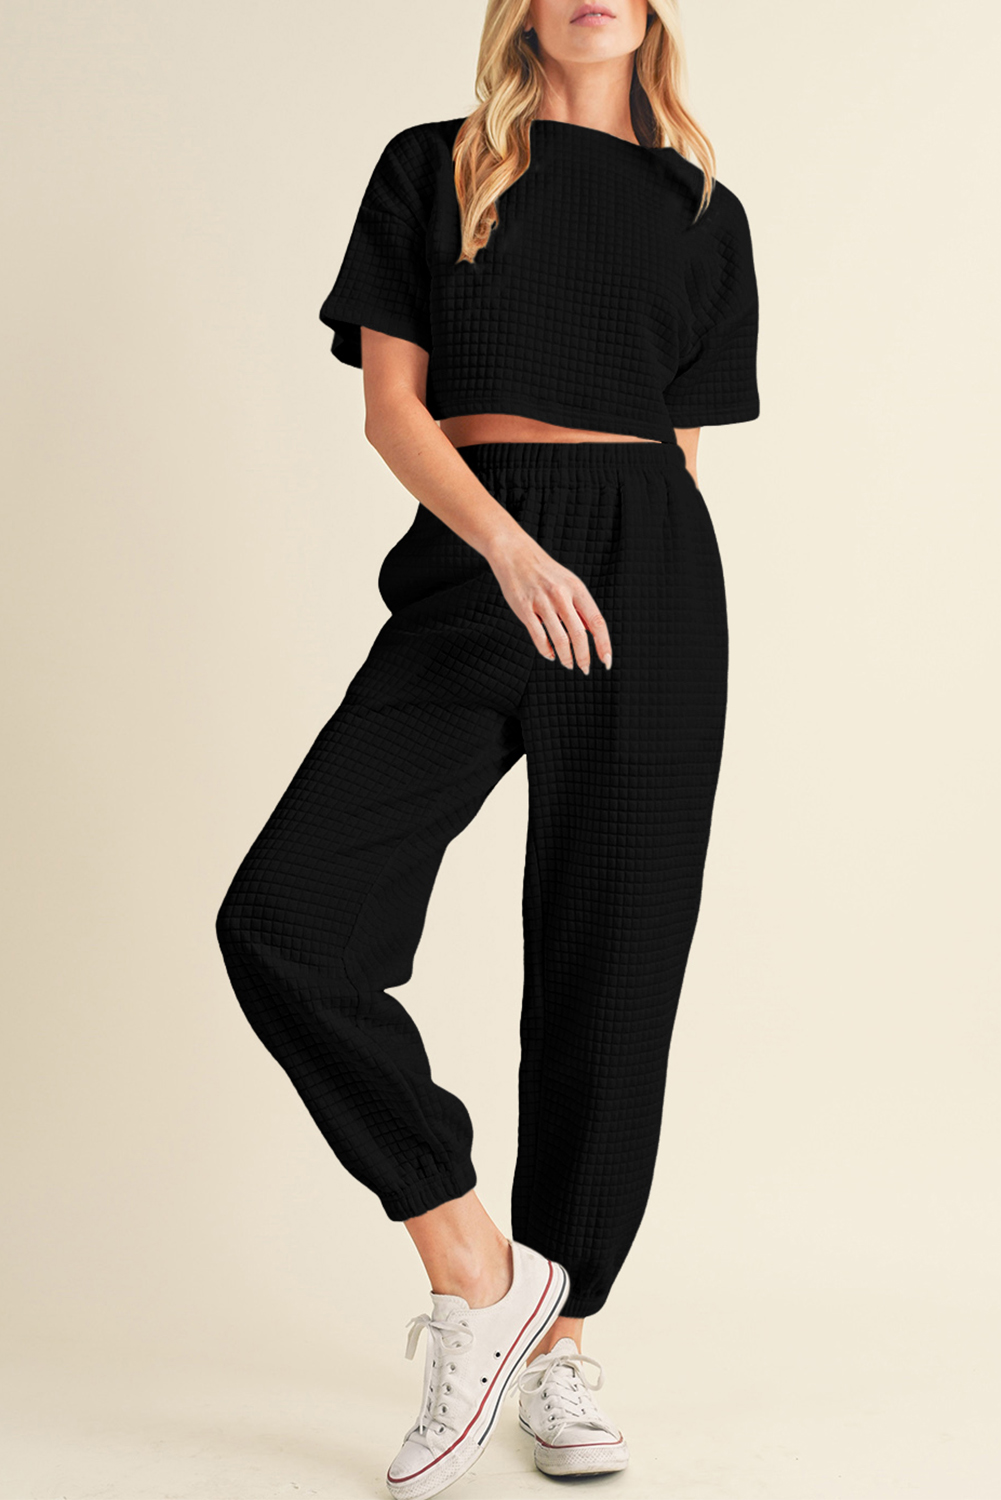 Shewin Wholesale Chic Lady Black Textured Cropped Tee and Jogger PANTS Set